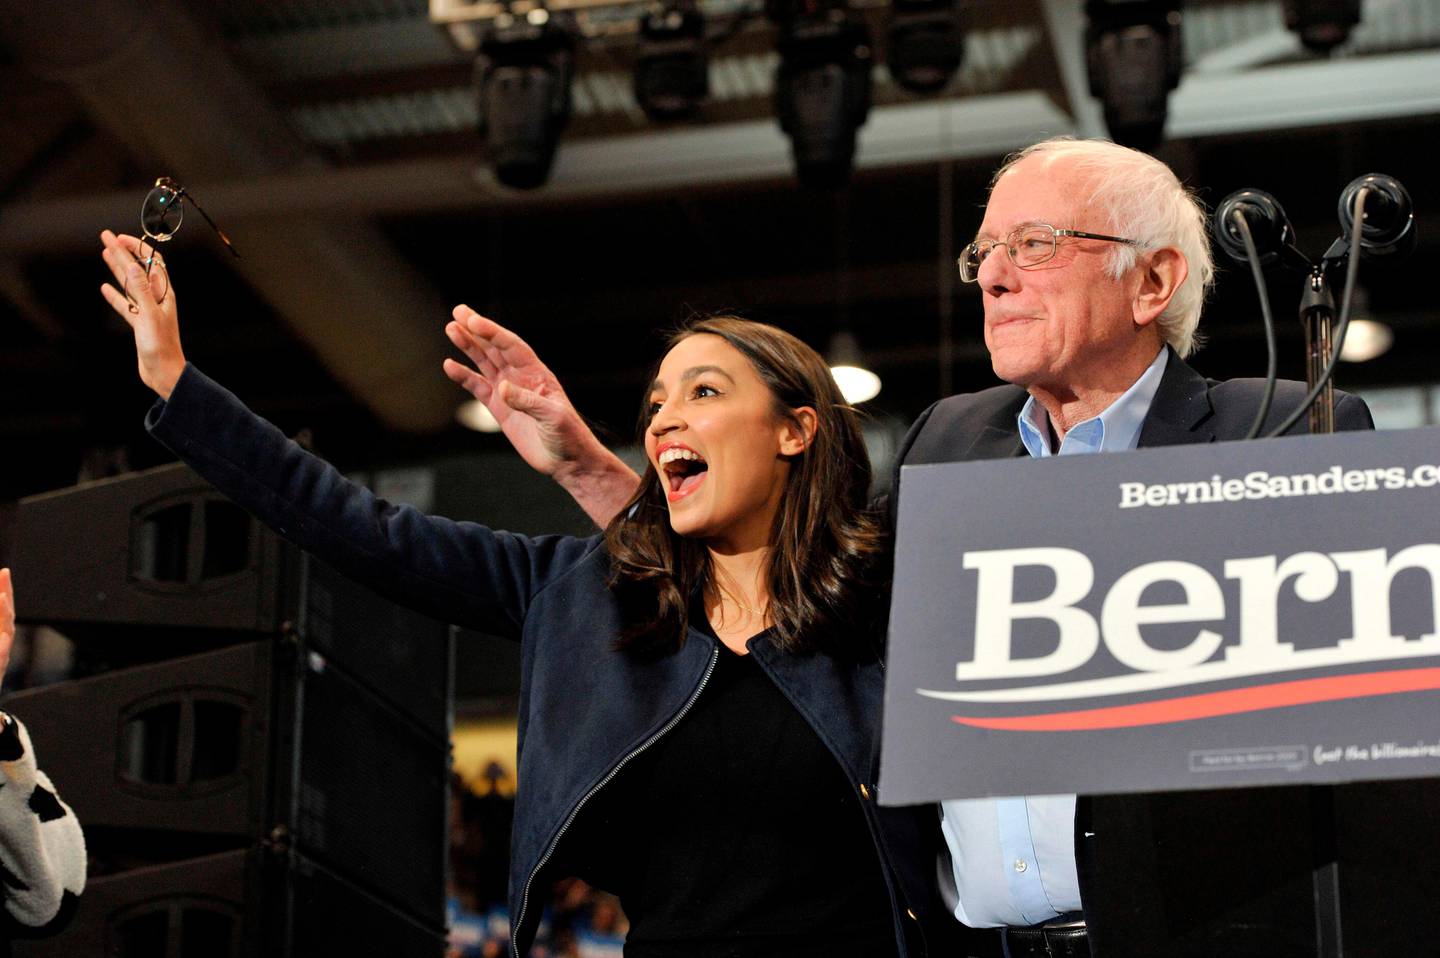 (FILES) In this file photo taken on February 10, 2020 Congresswoman Alexandria Ocasio-Cortez and Presidential Candidate Vermont Senator Bernie Sanders wave to his supporters at rally at the University of New Hampshire in Durham, New Hampshire. - Two years after Alexandria Ocasio-Cortez stunned the US political establishment by winning a seat in Congress and becoming one of its best-known members, another upstart New Yorker is gaining attention, one of several likely electoral wins galvanizing the Democratic left ahead of November. (Photo by Joseph Prezioso / AFP)